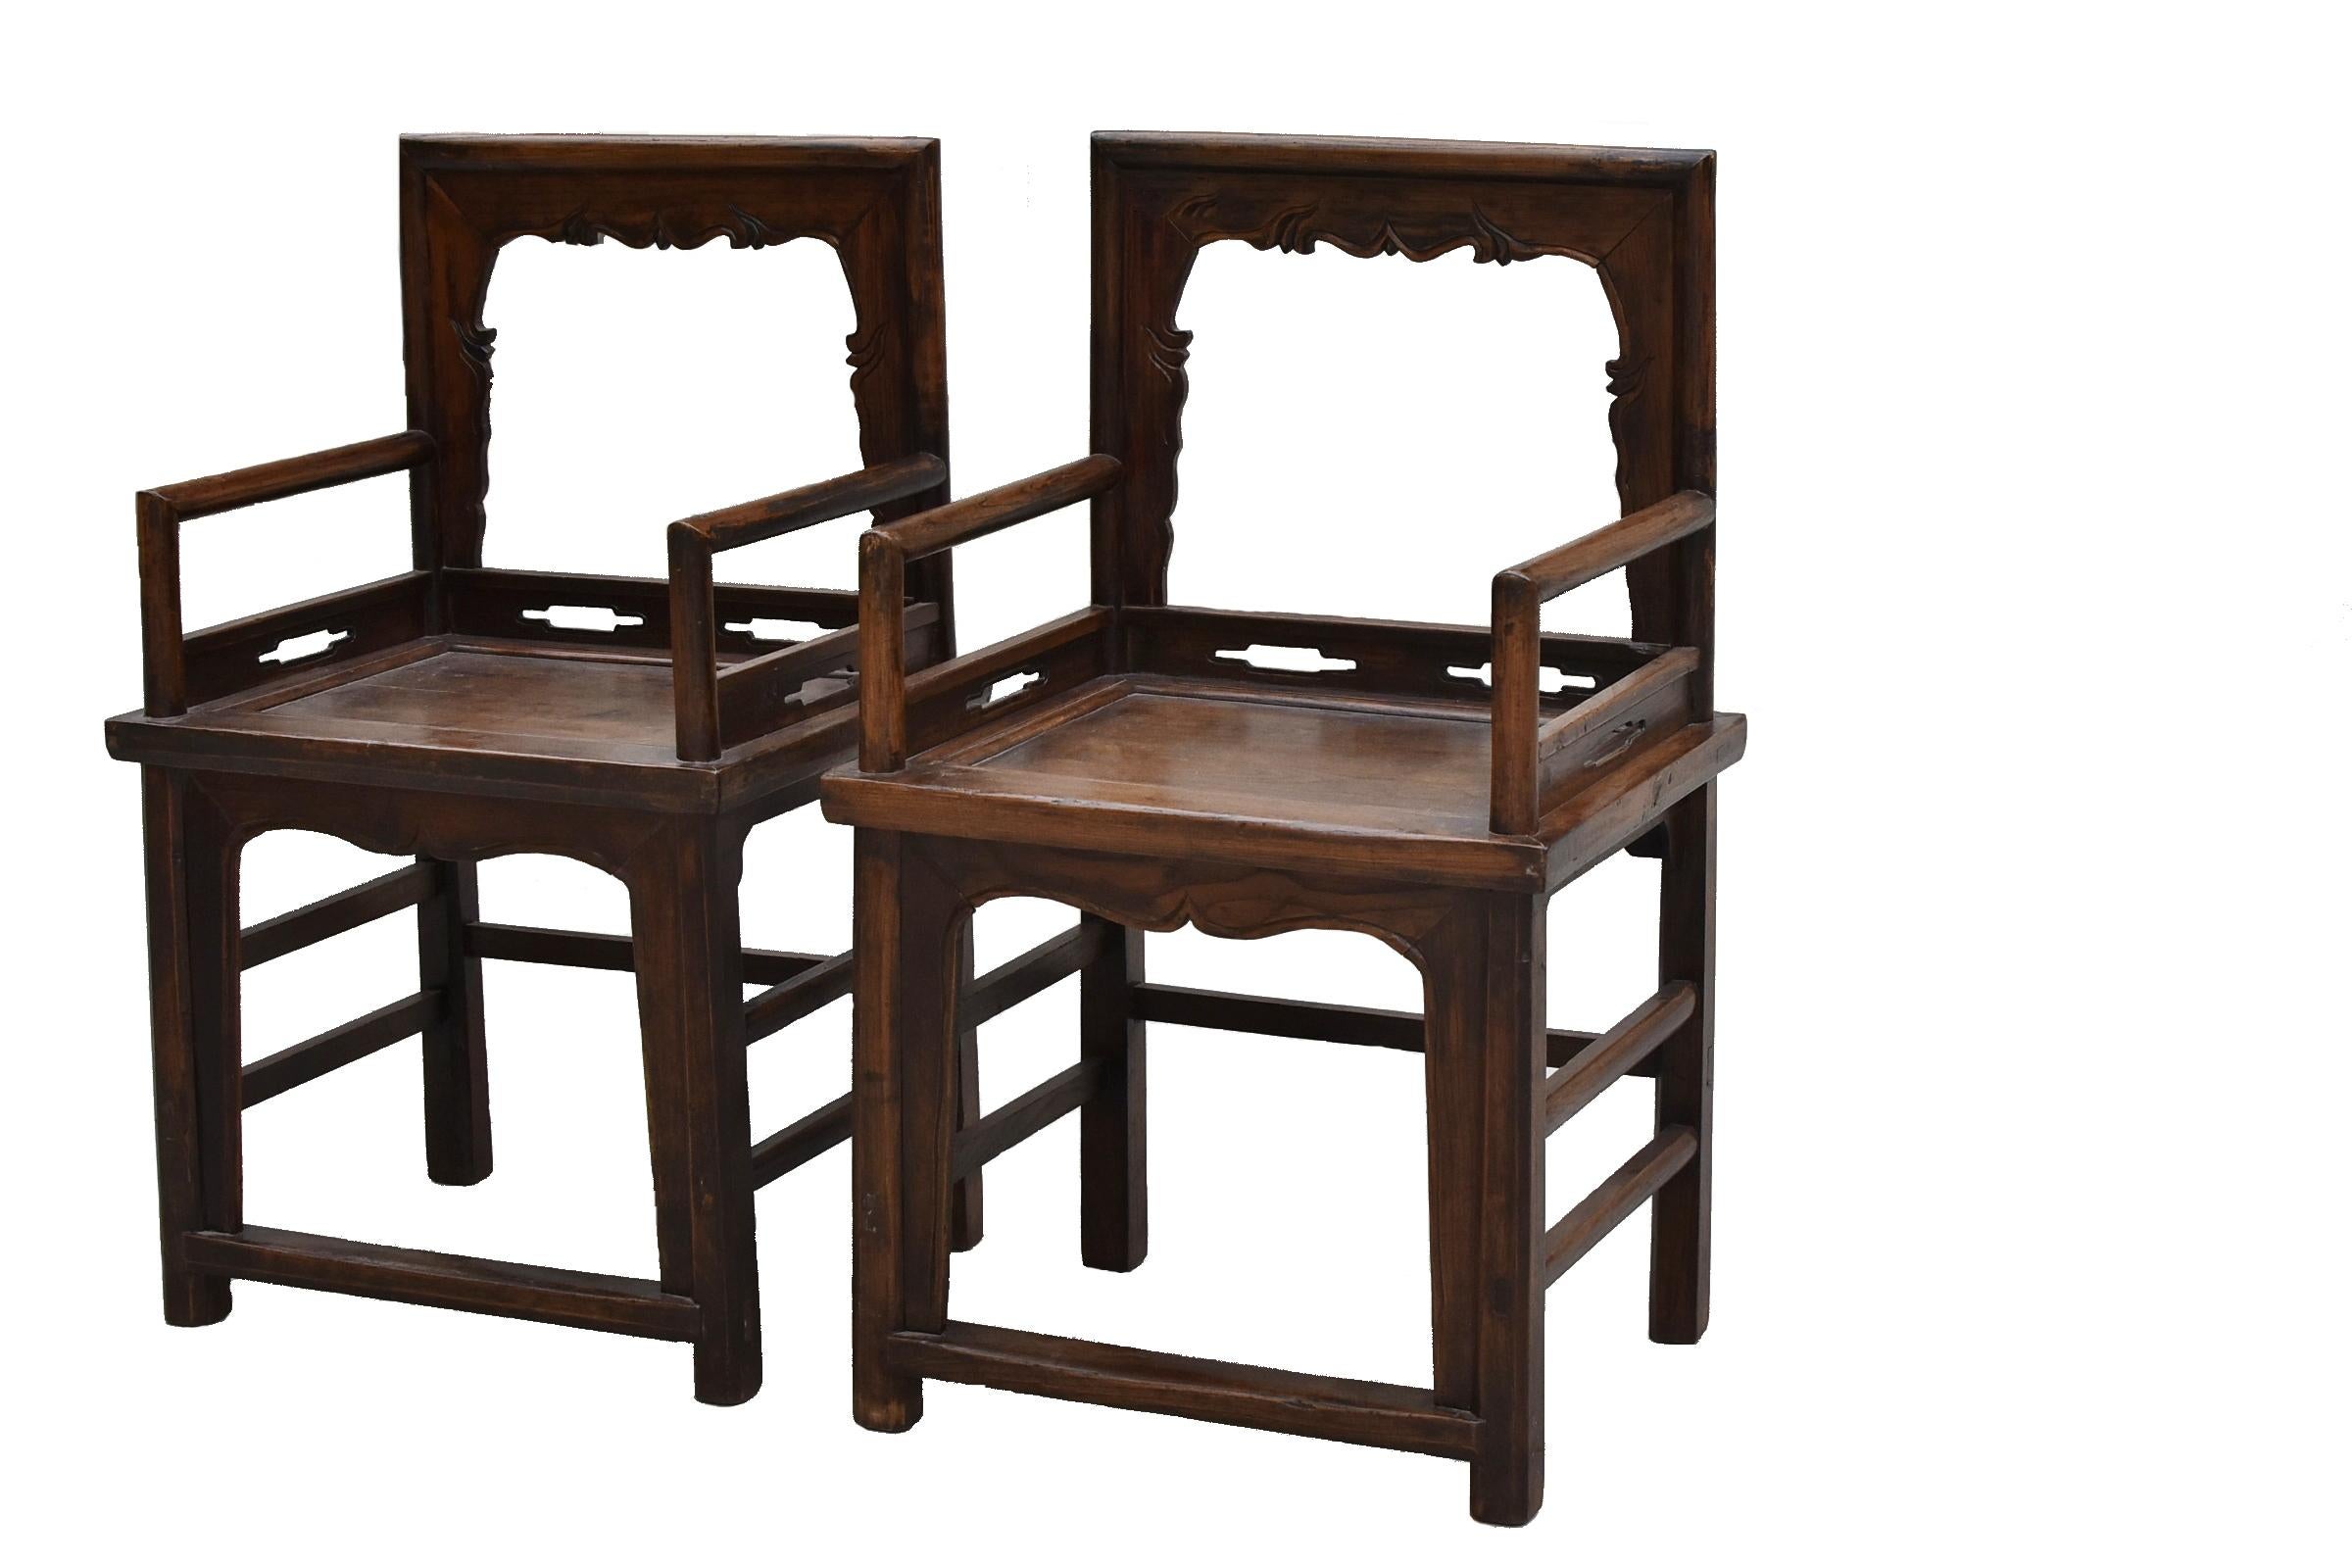 ming style furniture